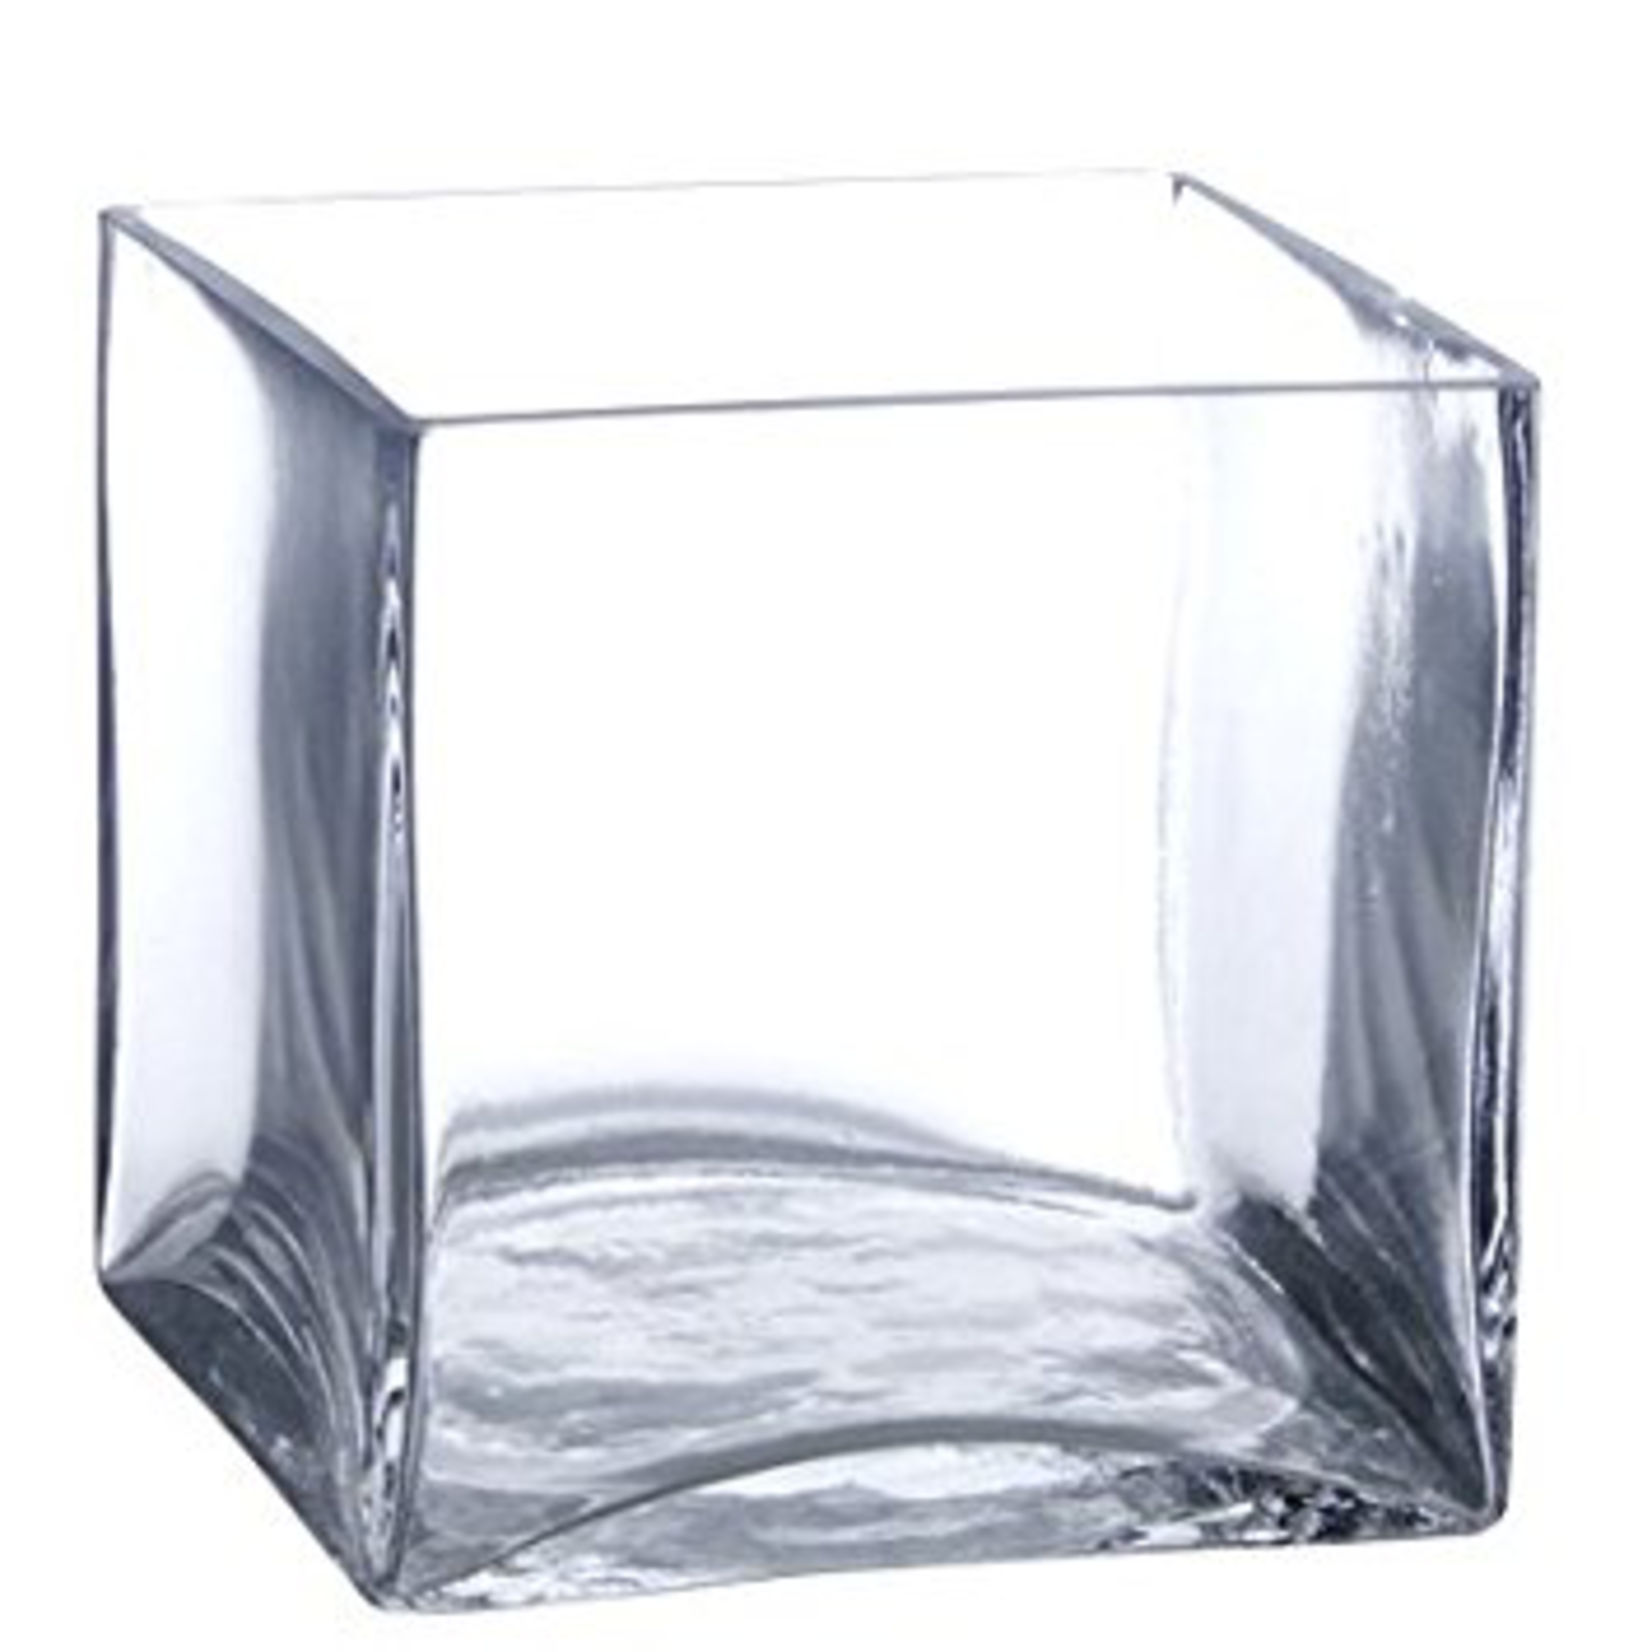 7" X 7" X 7" CLEAR GLASS CUBE VASE